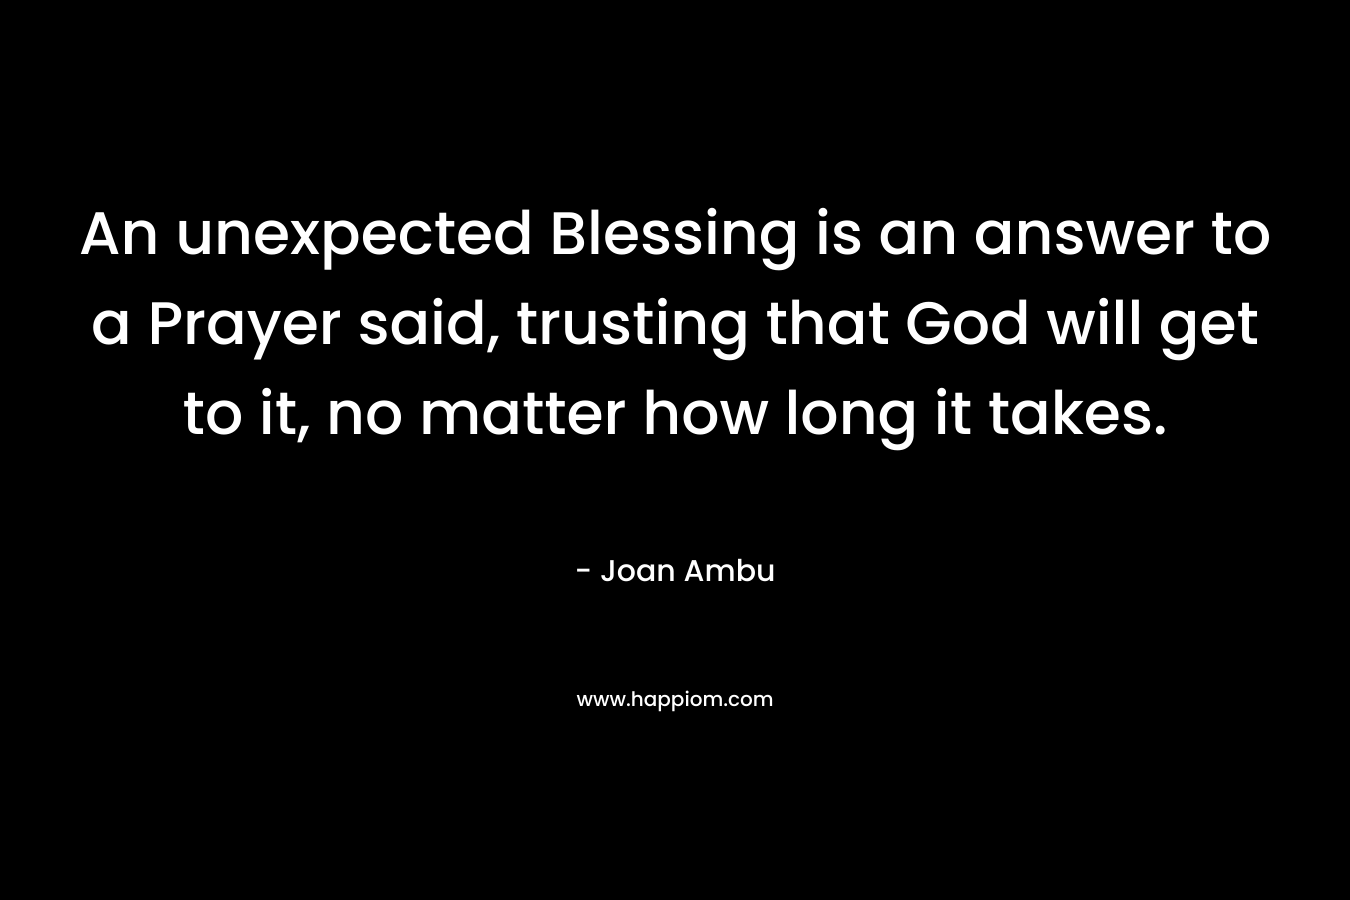 An unexpected Blessing is an answer to a Prayer said, trusting that God will get to it, no matter how long it takes. – Joan Ambu